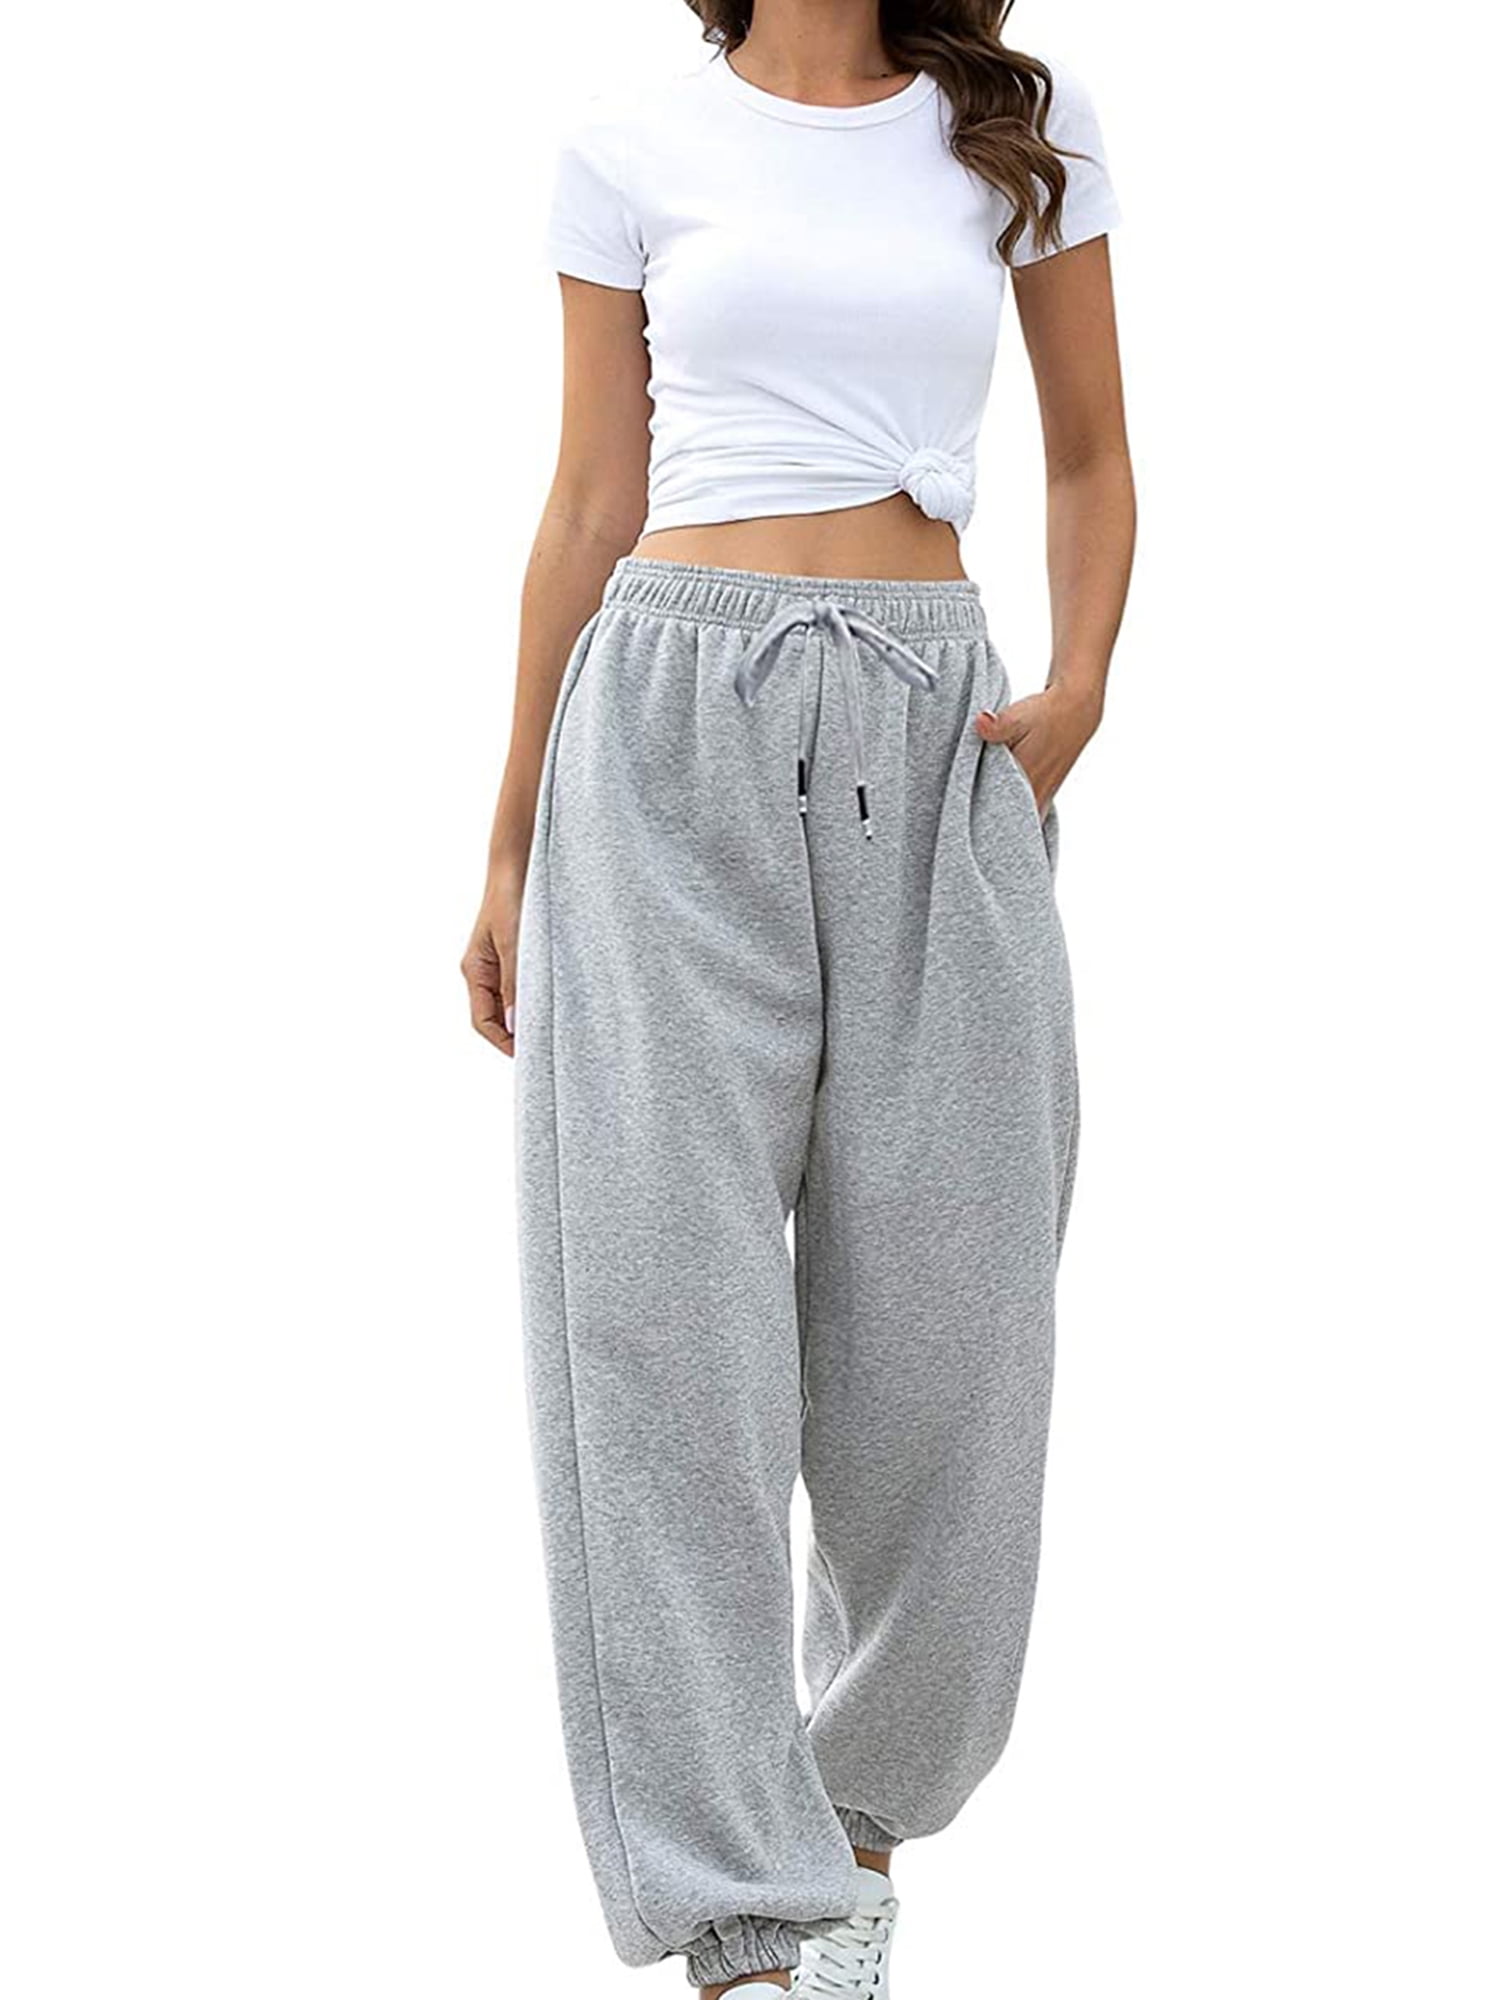 Womens Yoga Pants with Pockets Sweatpants Drawstring Lounge Joggers Running Active Casual Trousers